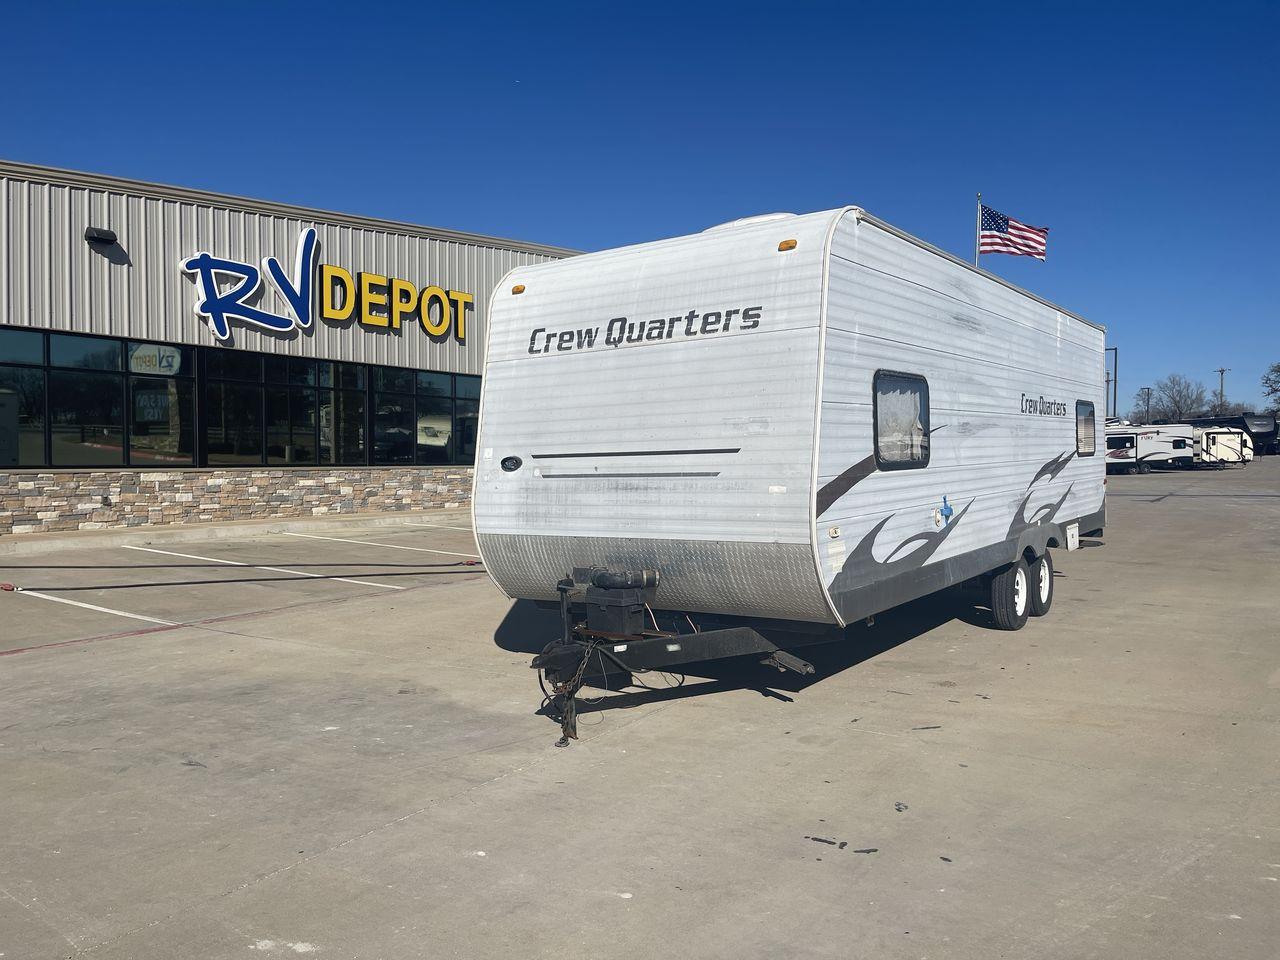 2010 WHITE FOREST RIVER CREW QUARTERS T24-2 - (4X4TWDZ21AR) , Dry Weight: 5,275 lbs | Gross Weight: 7,713 lbs | Slides: 0 transmission, located at 4319 N Main St, Cleburne, TX, 76033, (817) 678-5133, 32.385960, -97.391212 - Photo #0